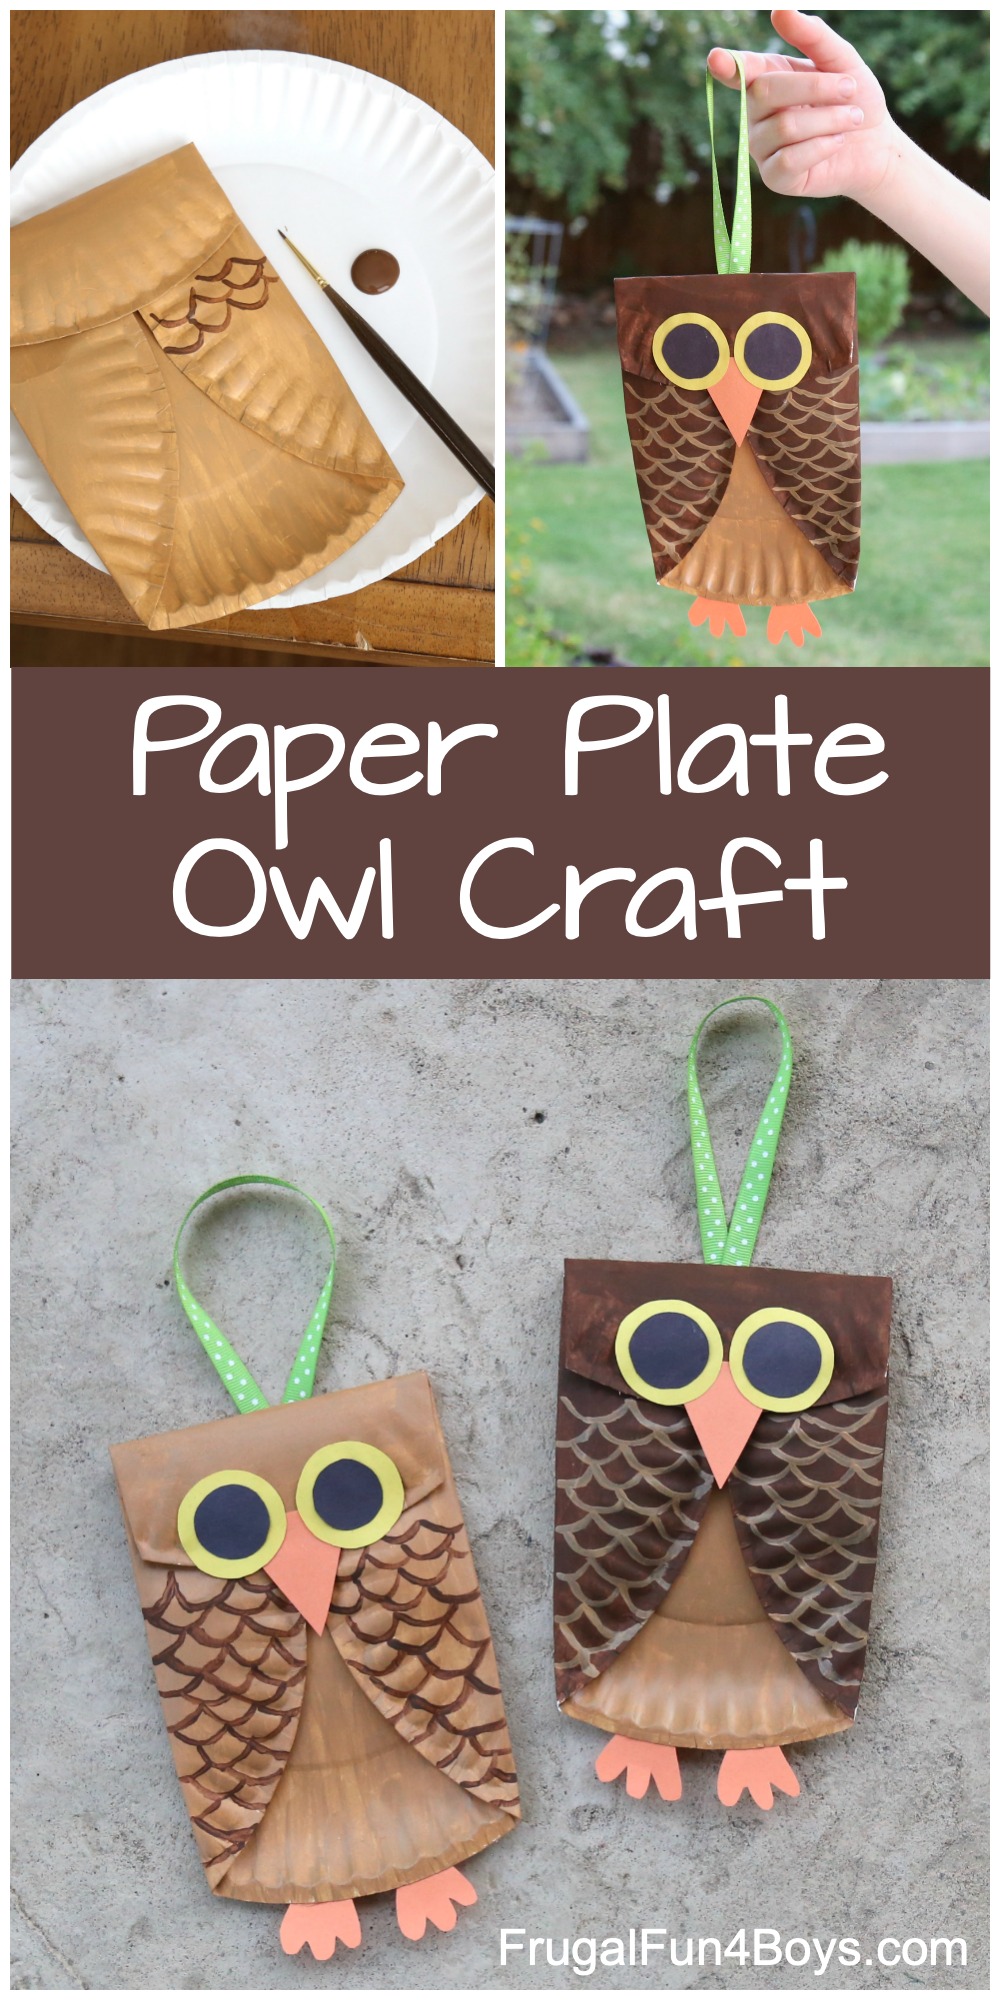 Paper Plate Owl Craft with construction paper eyes, beak, and feet